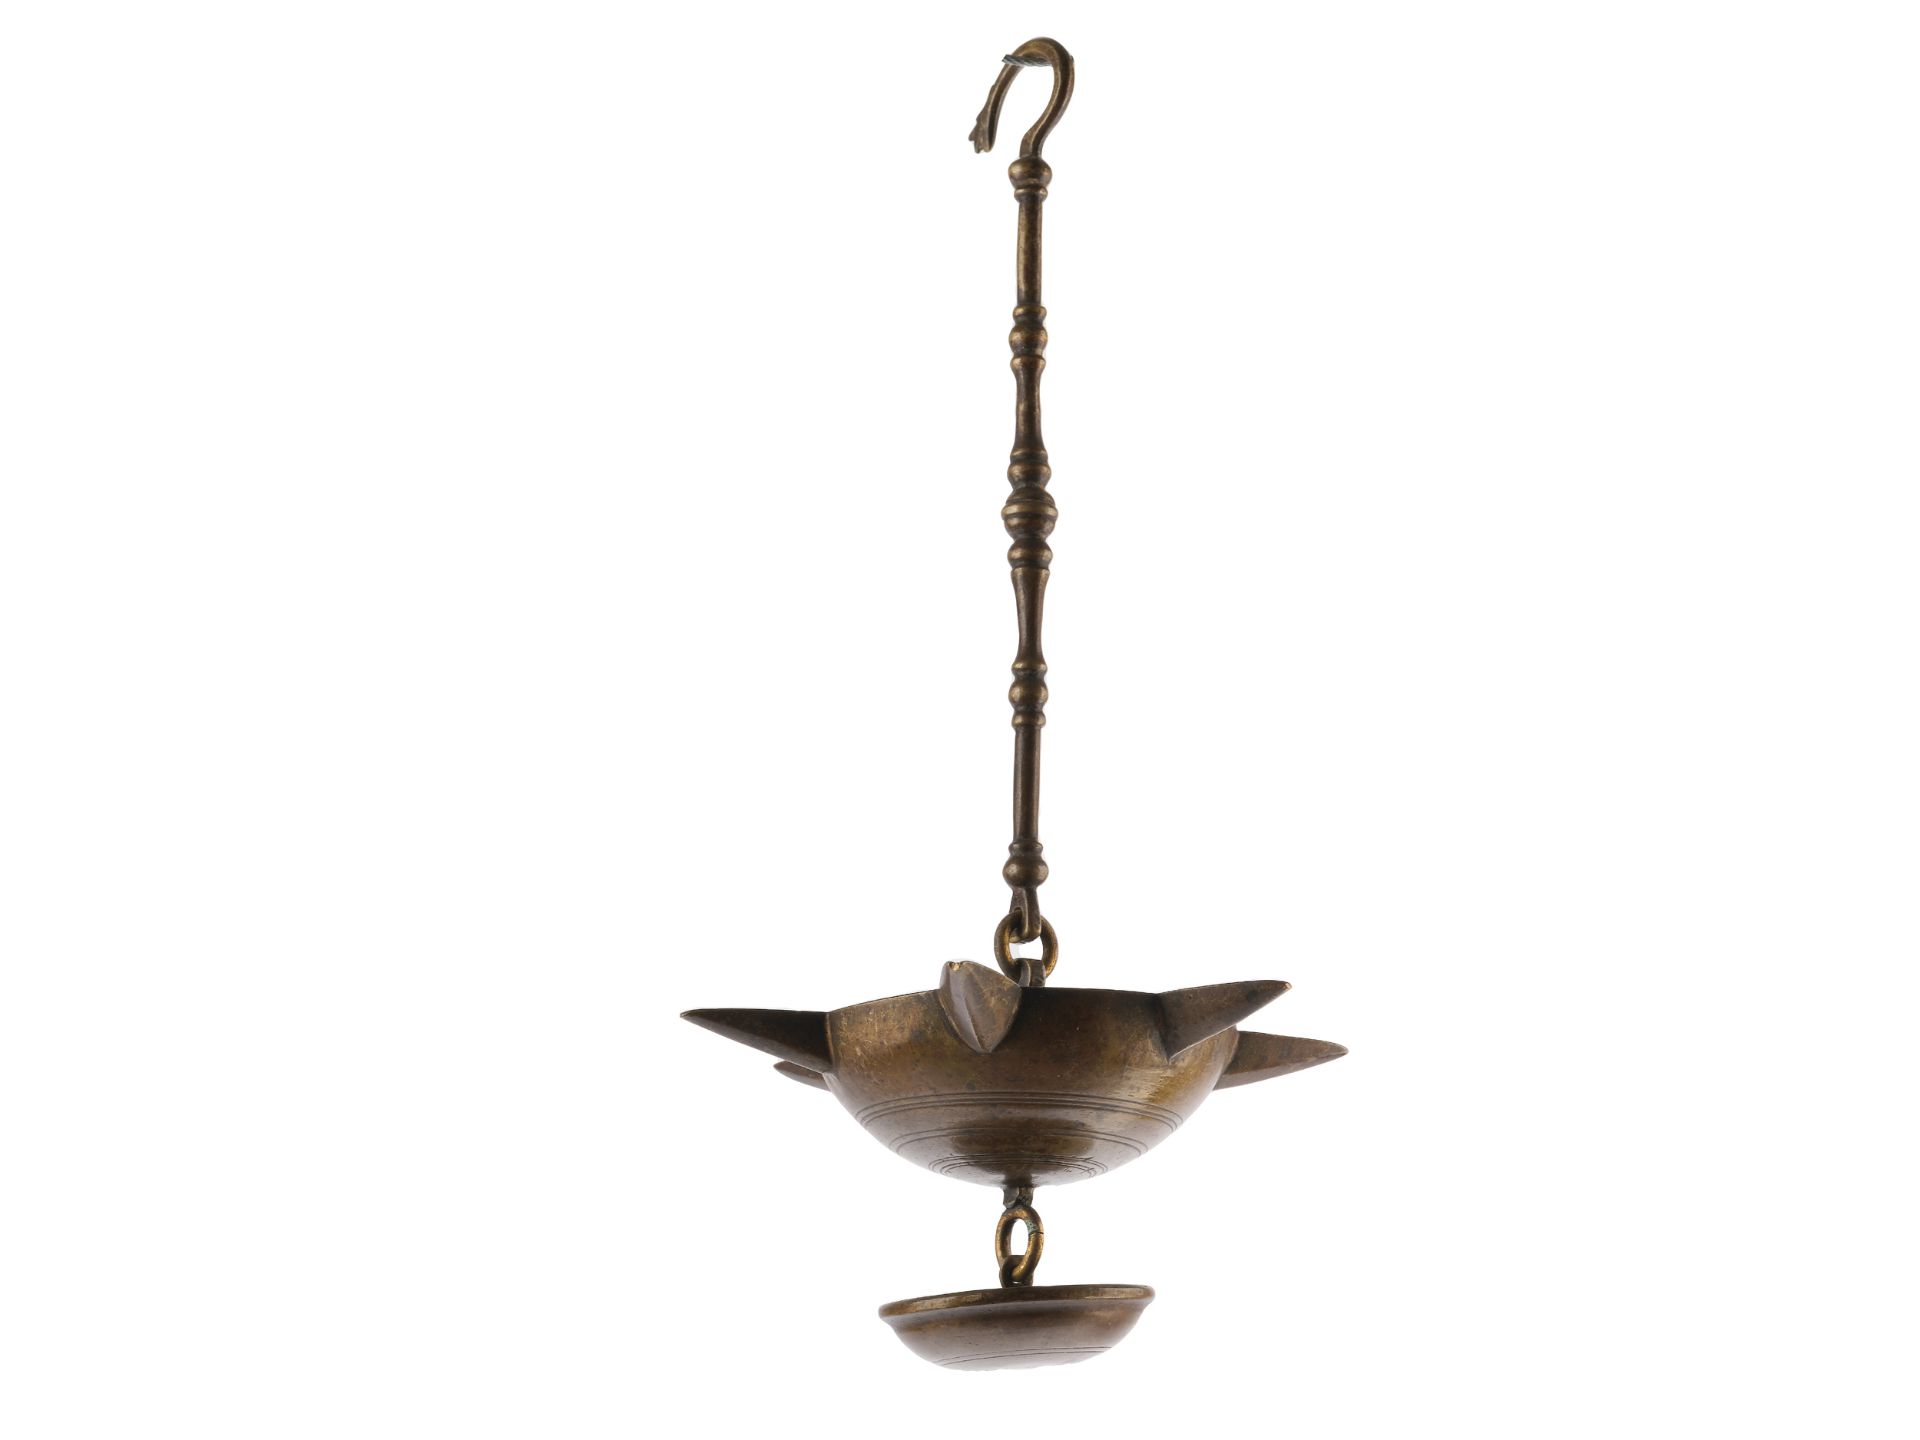 Oil lamp, Six flames, 17th/18th century